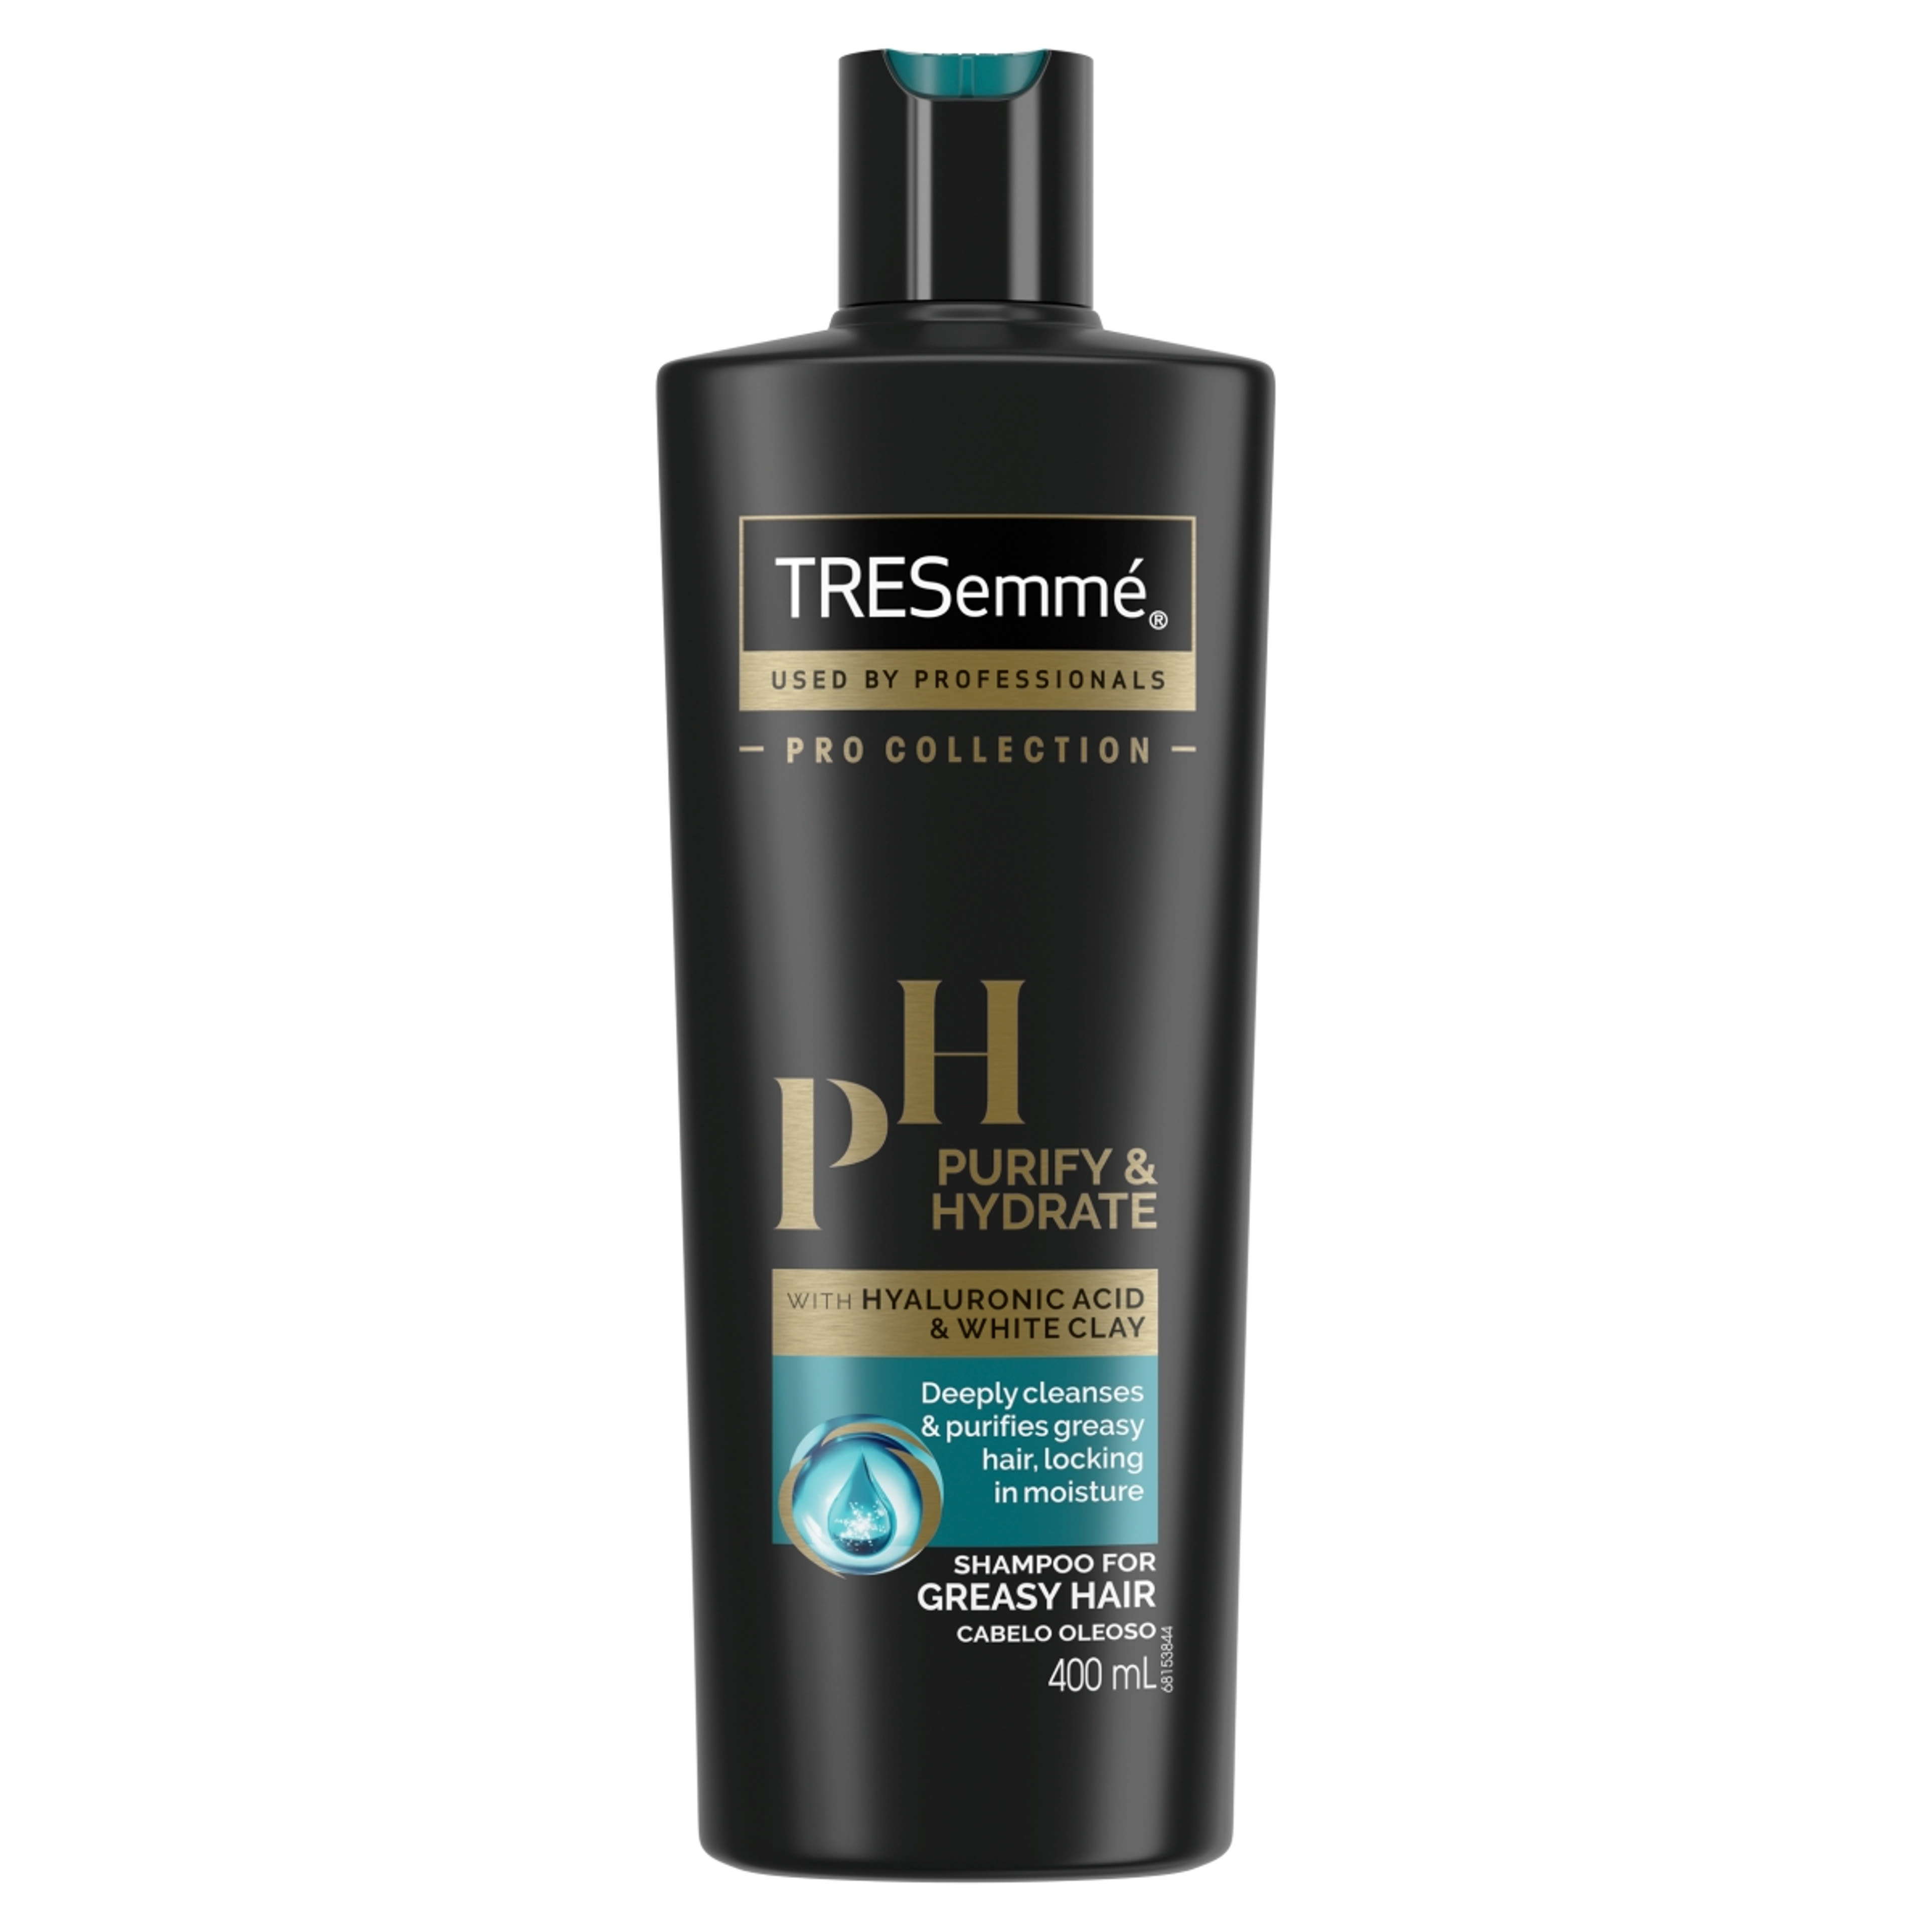 Tresemme purify & hydrate sampon - 400 ml